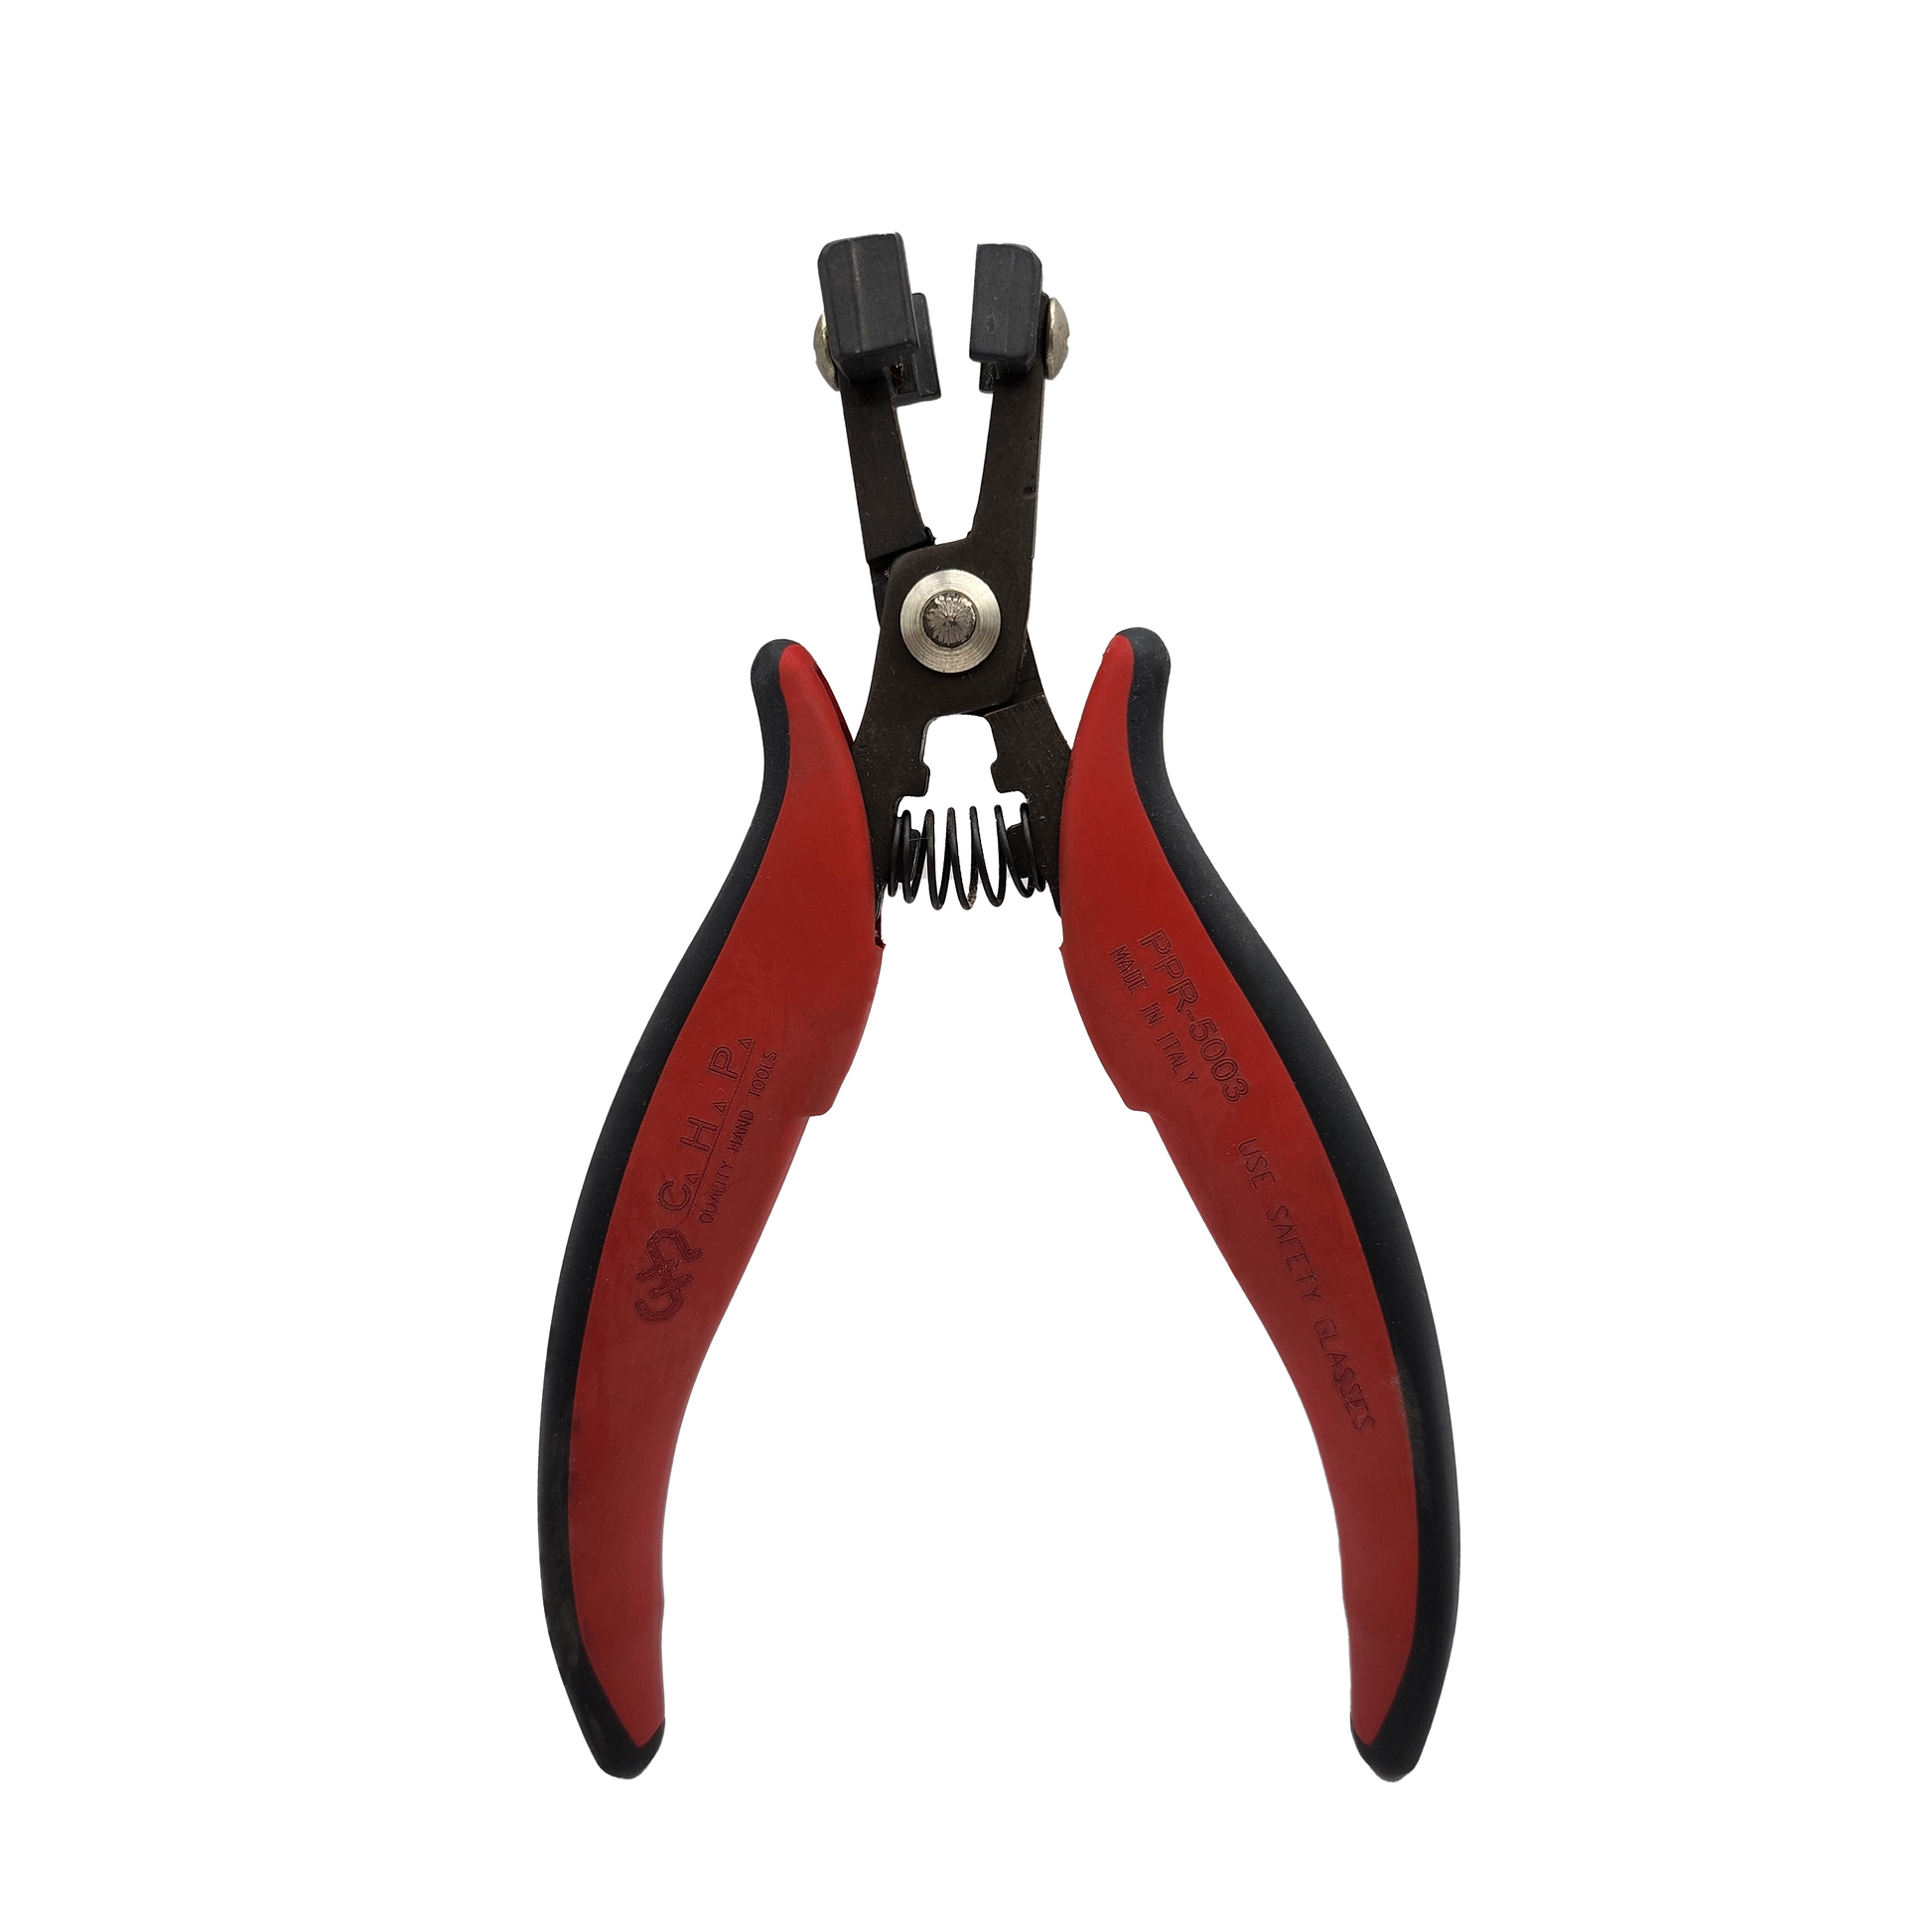 CHP_ CHP PPR-5003 Lead Forming Tool_ Cutters, Pliers, Multi-Tools_ Hakko Products